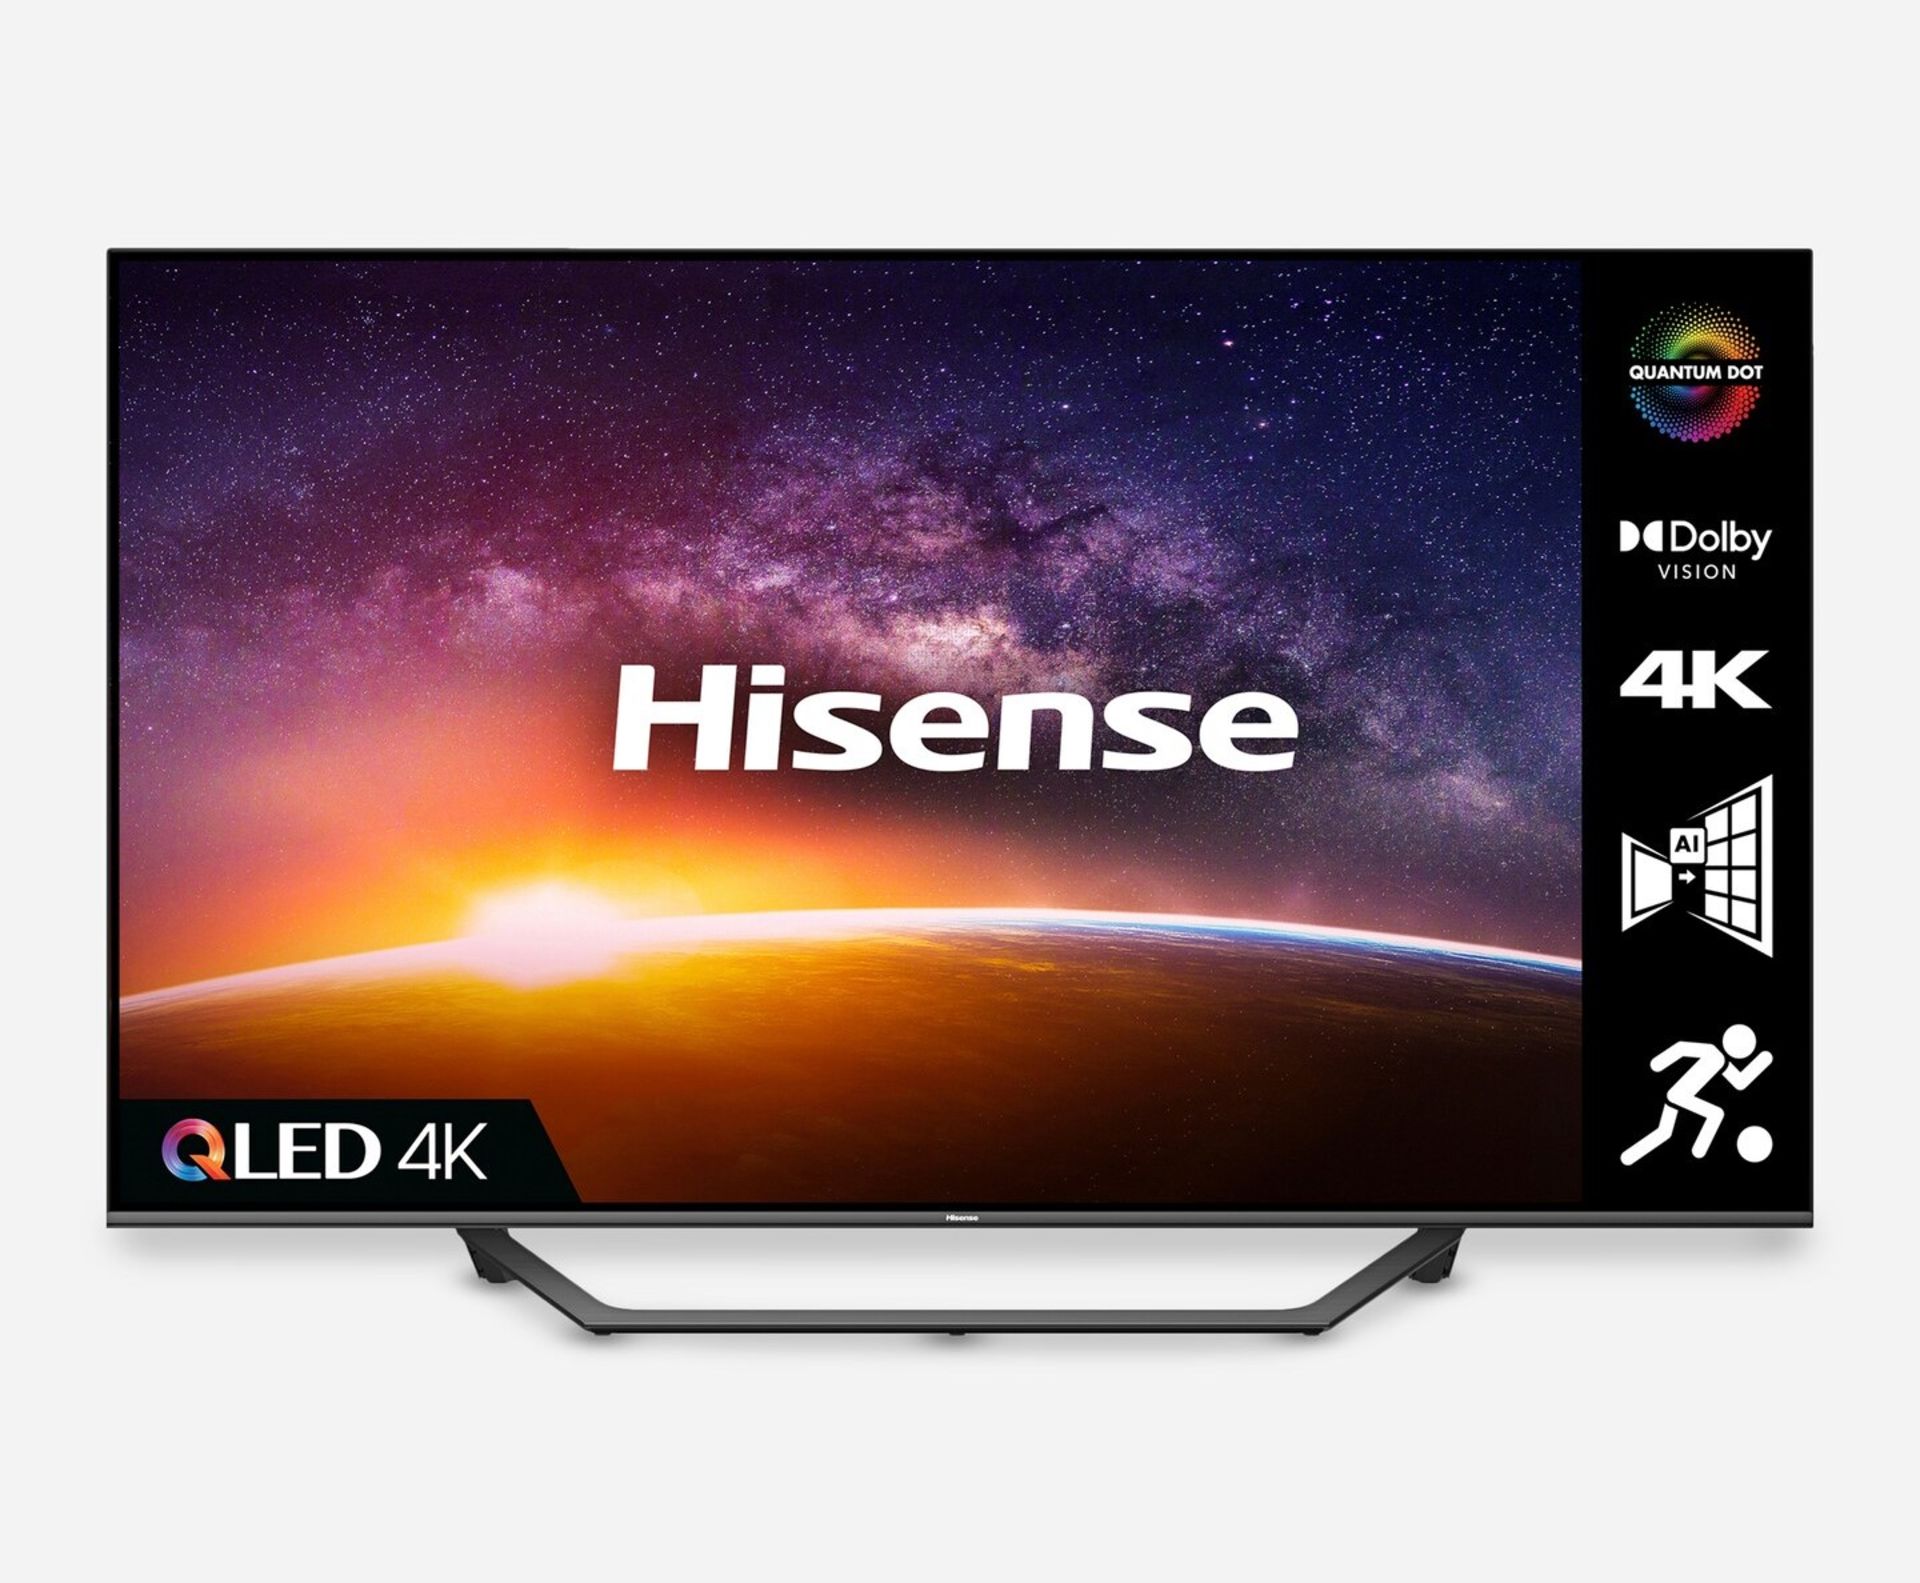 1 BOXED HISENSE 43A7GQTUK 43" SMART 4K ULTRA HD HDR QLED TV WITH ALEXA & GOOGLE ASSISTANT WITH STAND